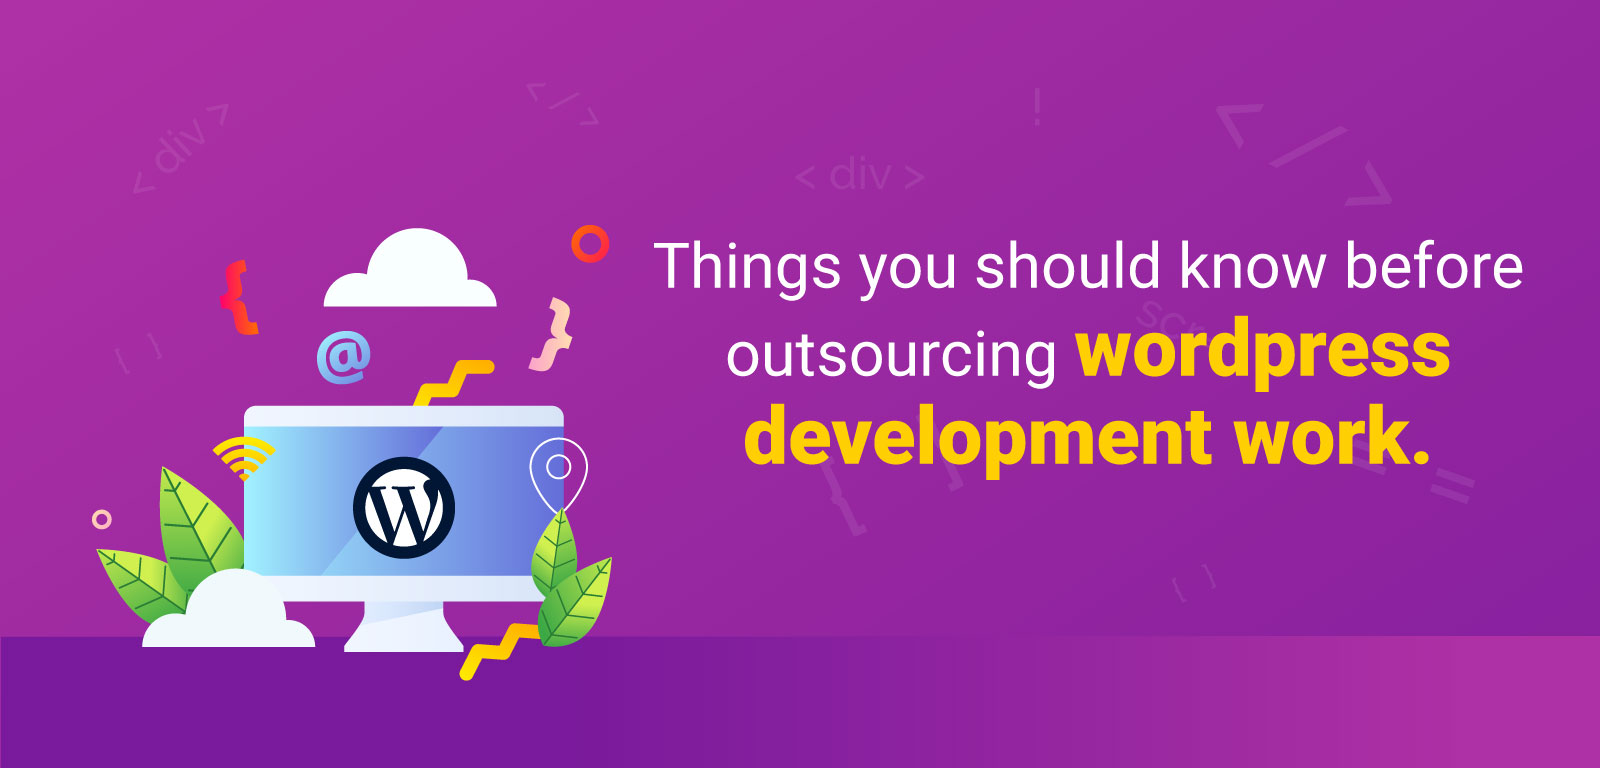 Things you should know before outsourcing wordpress development work